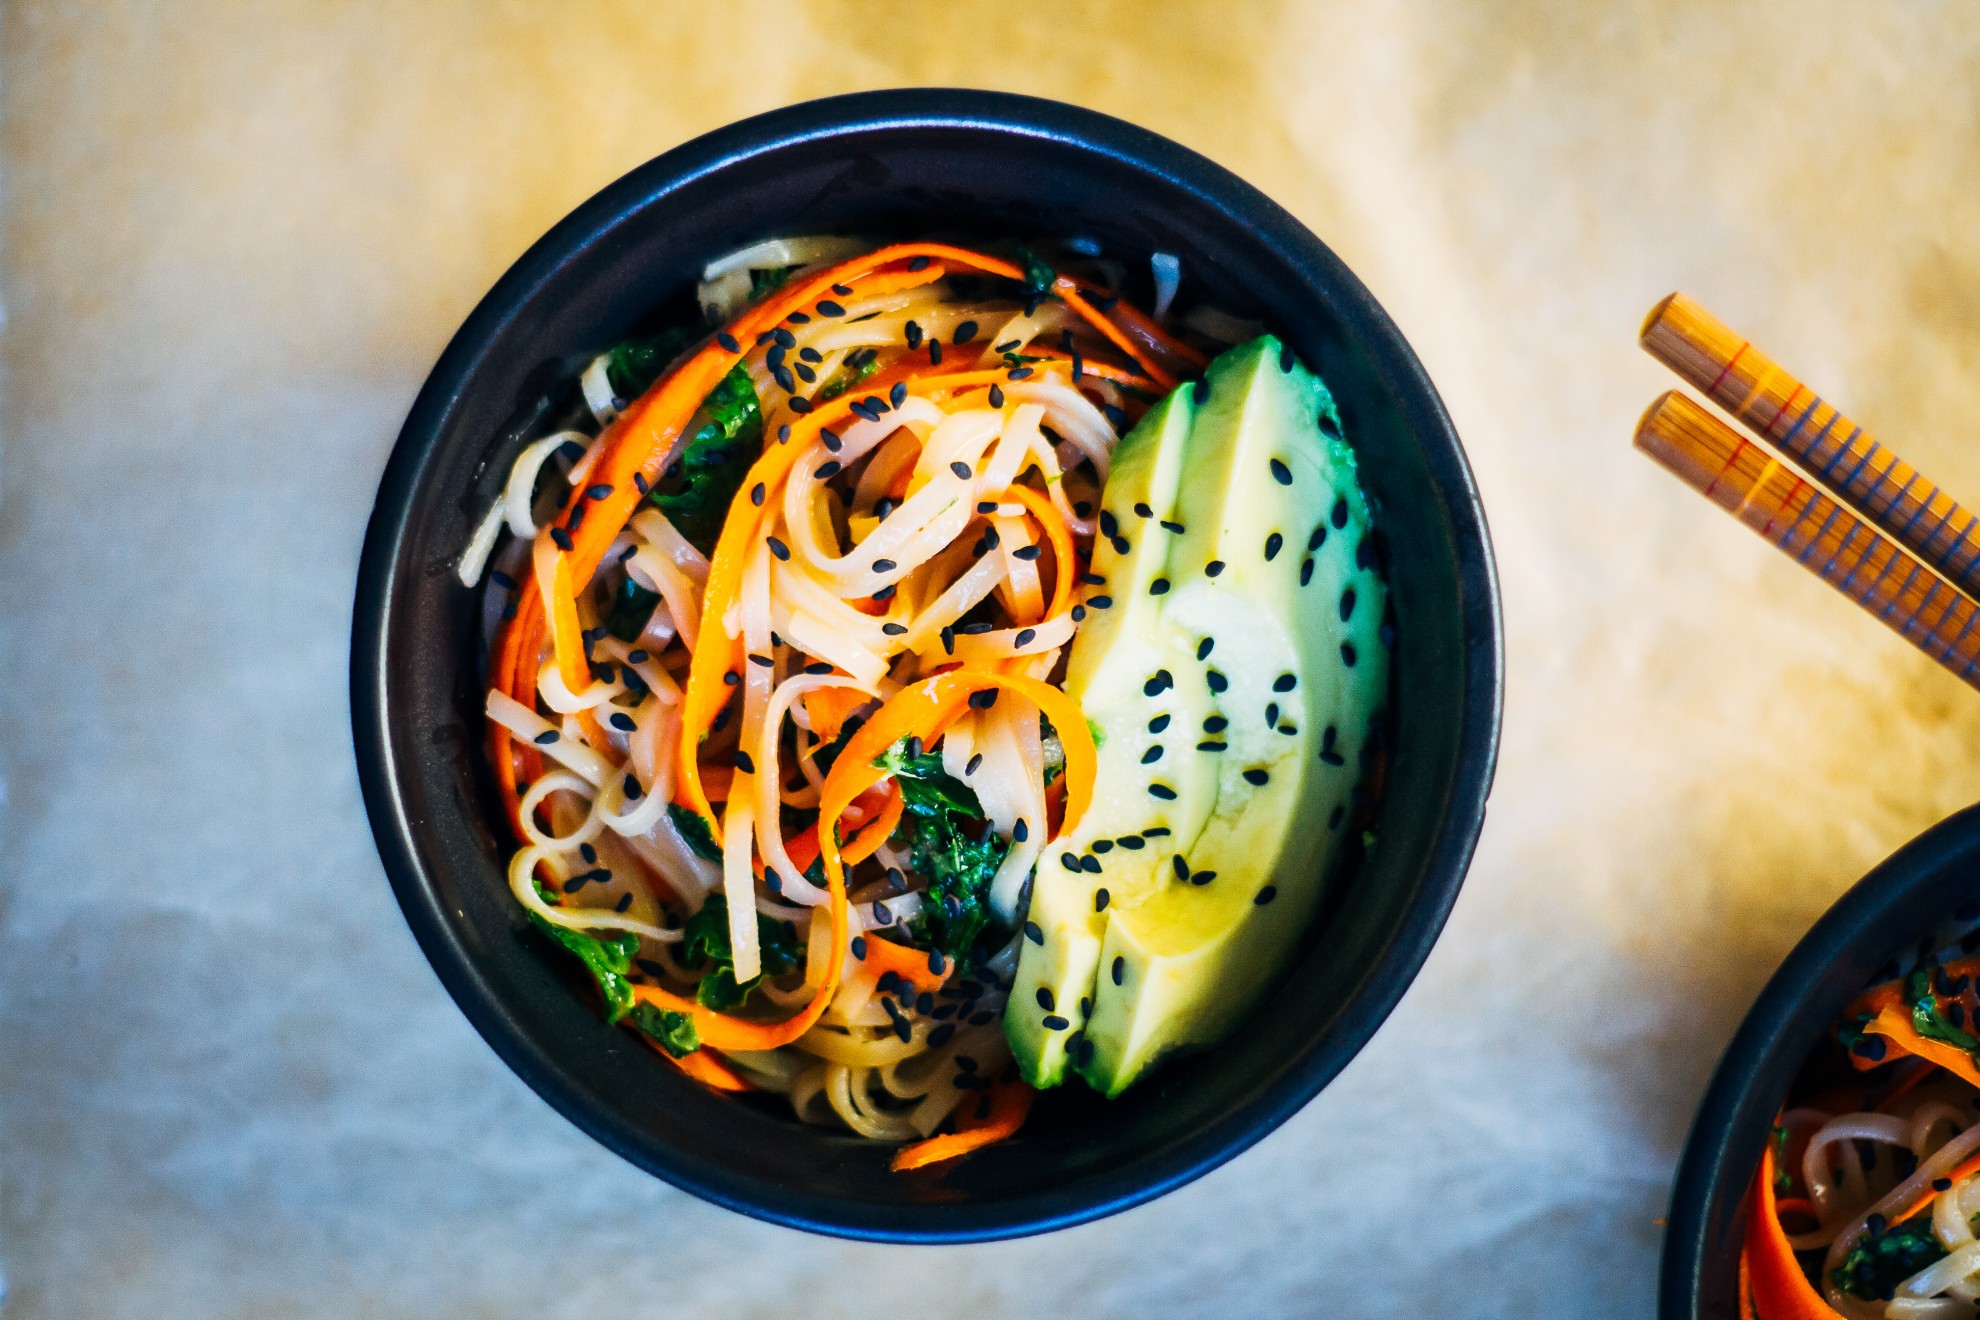 brown rice + carrot noodles w/ miso ginger glaze